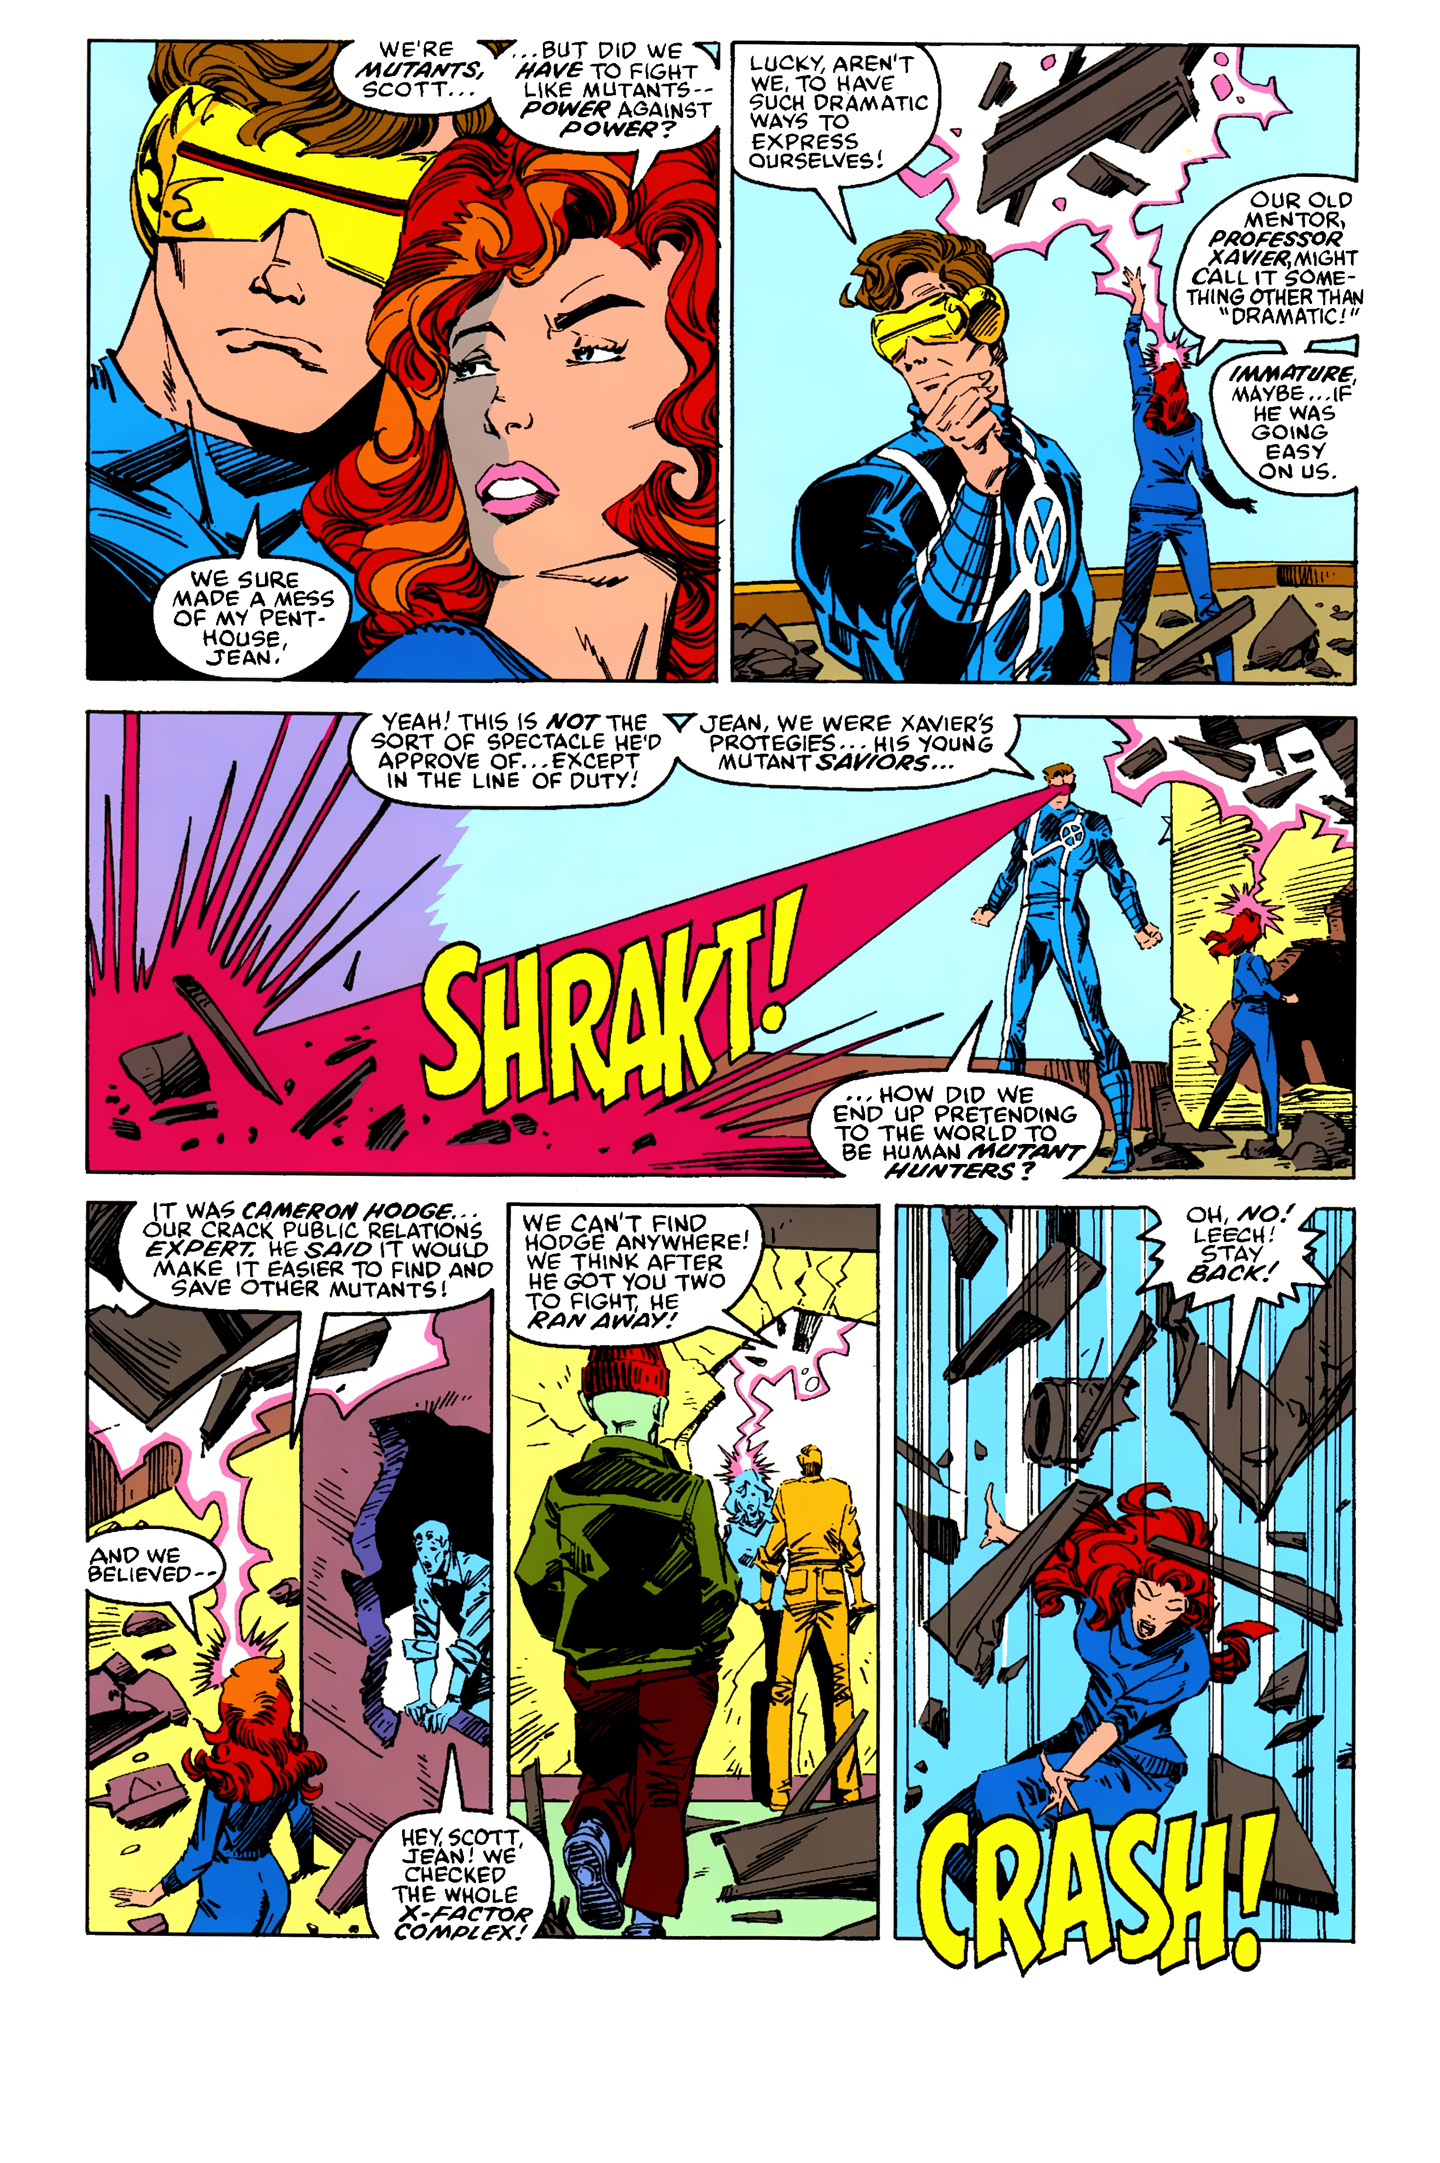 X-Factor (1986) 19 Page 2